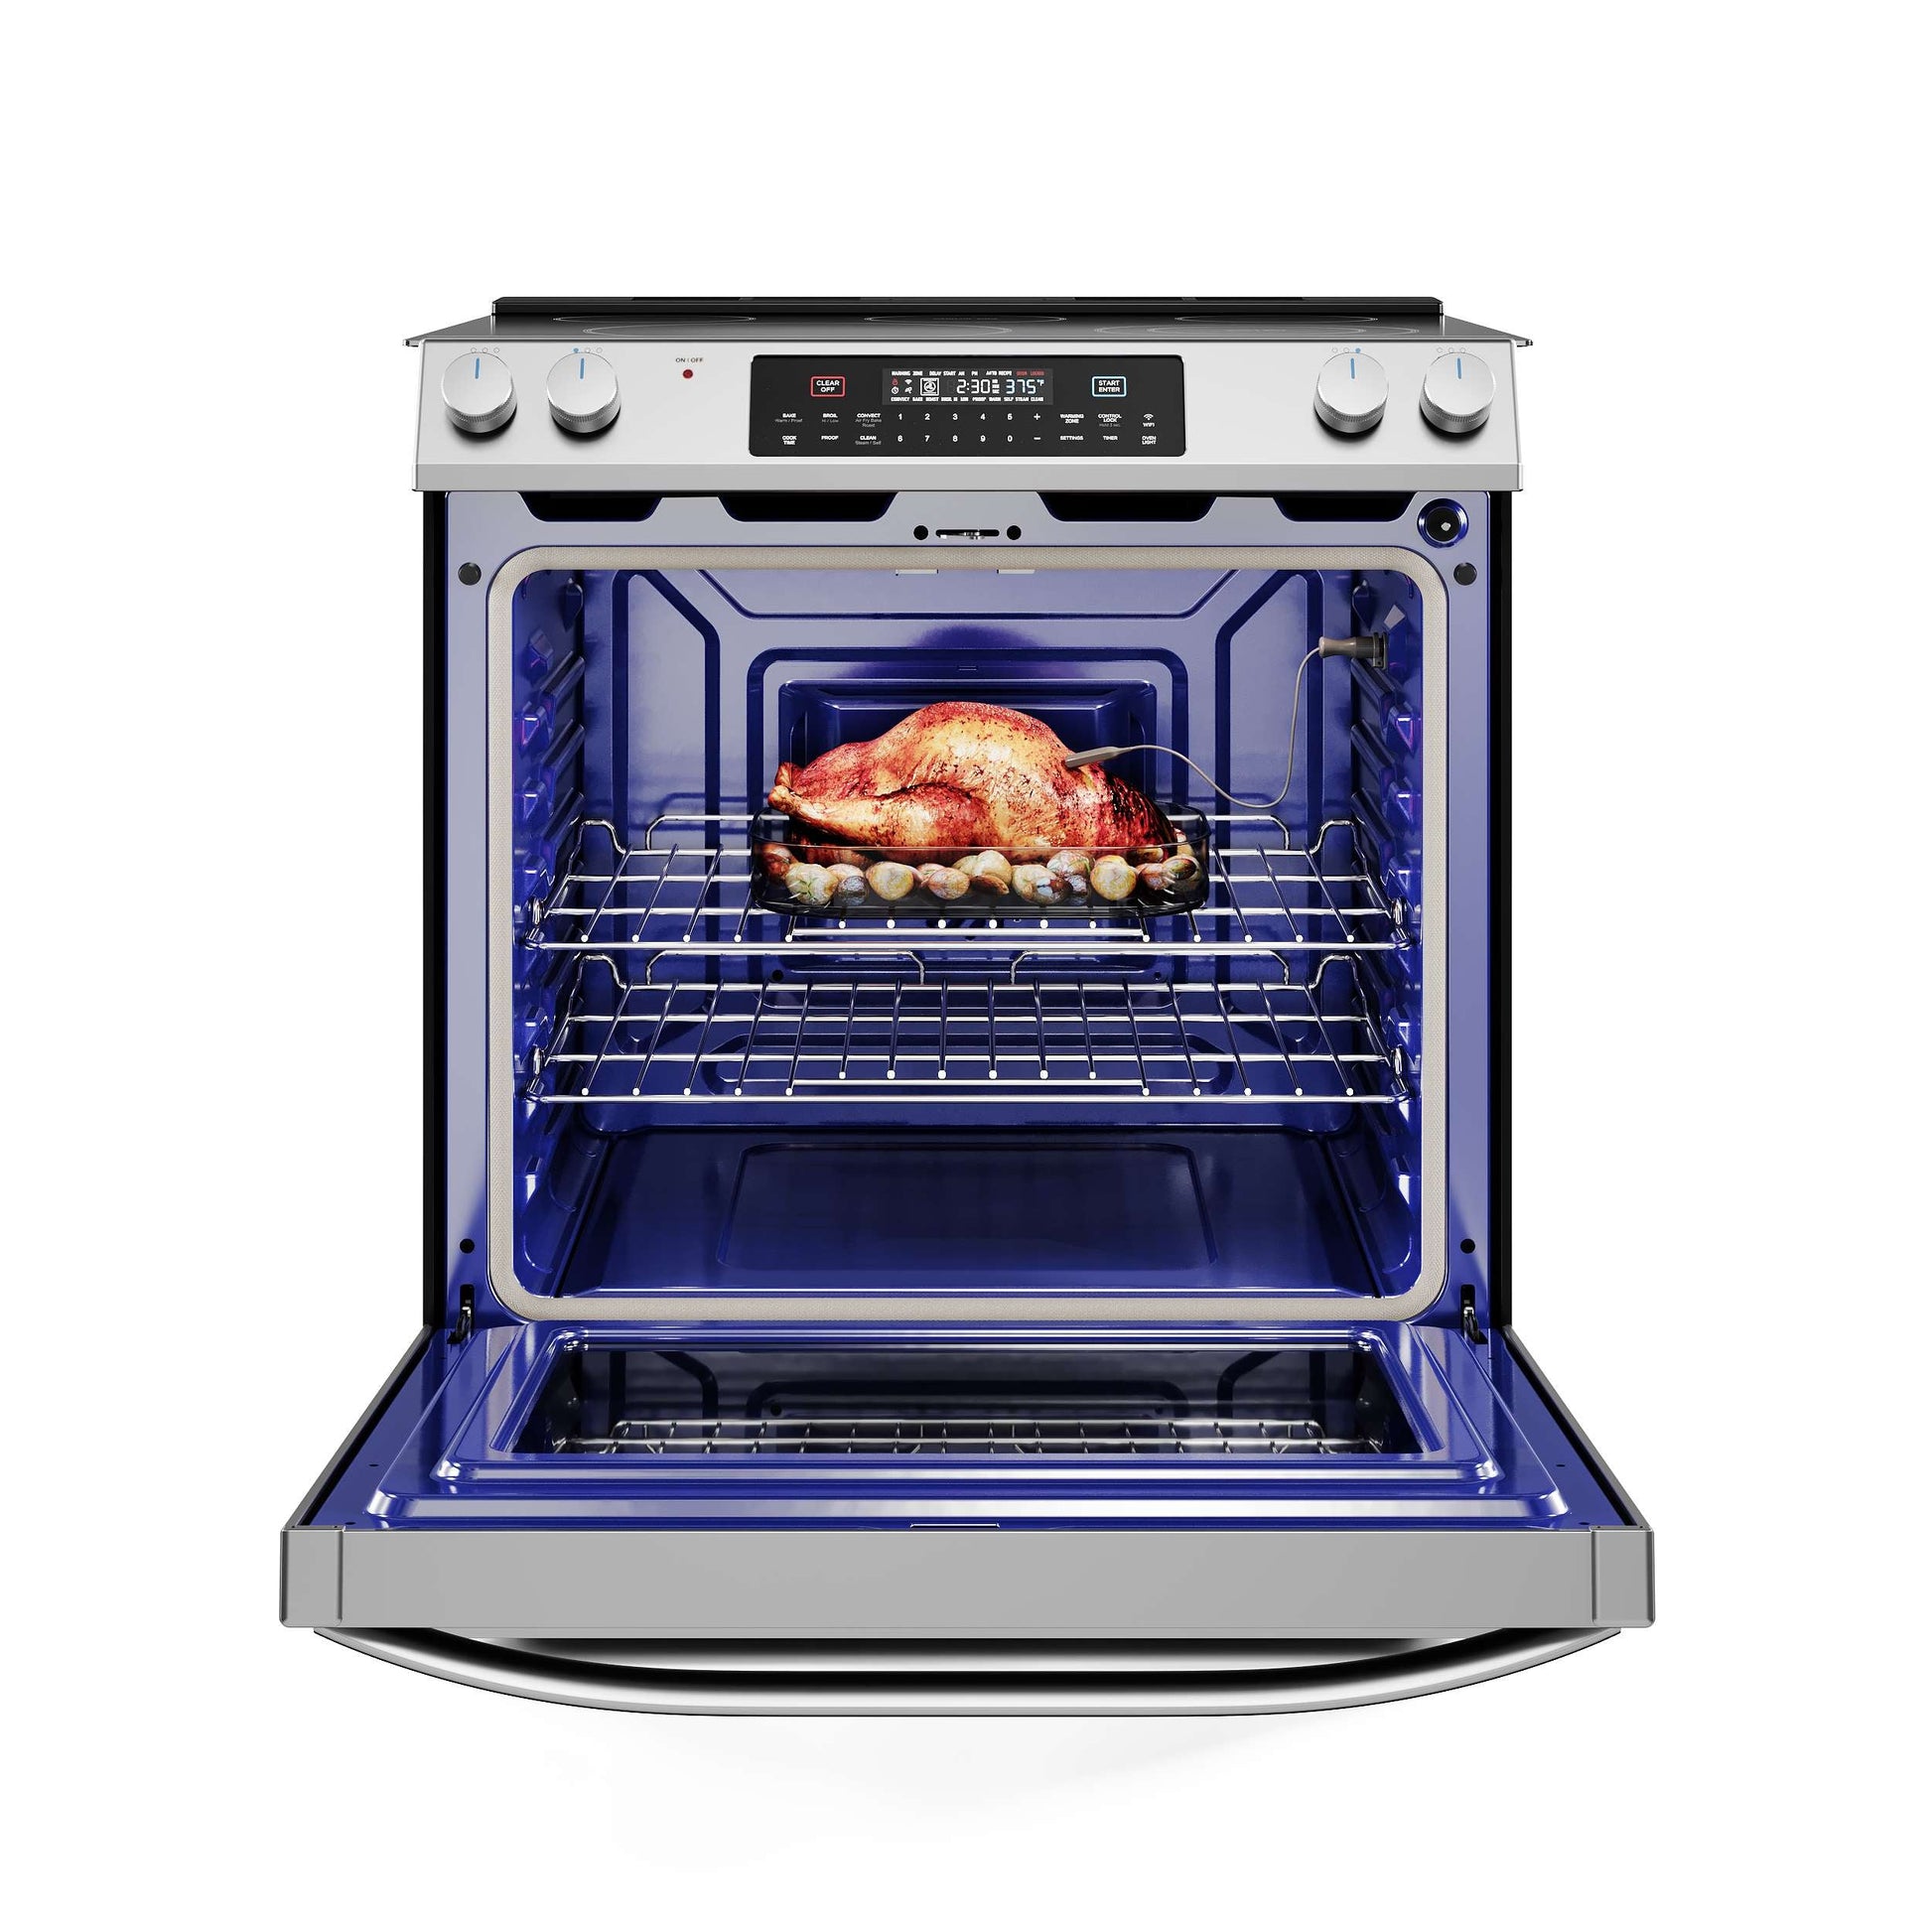 https://kitchenoasis.com/cdn/shop/files/Midea-Smart-30-5-Burner-Self-Cleaning-Electric-Range-With-Convection-Oven-MES30S2AST-9.jpg?v=1692930436&width=1946